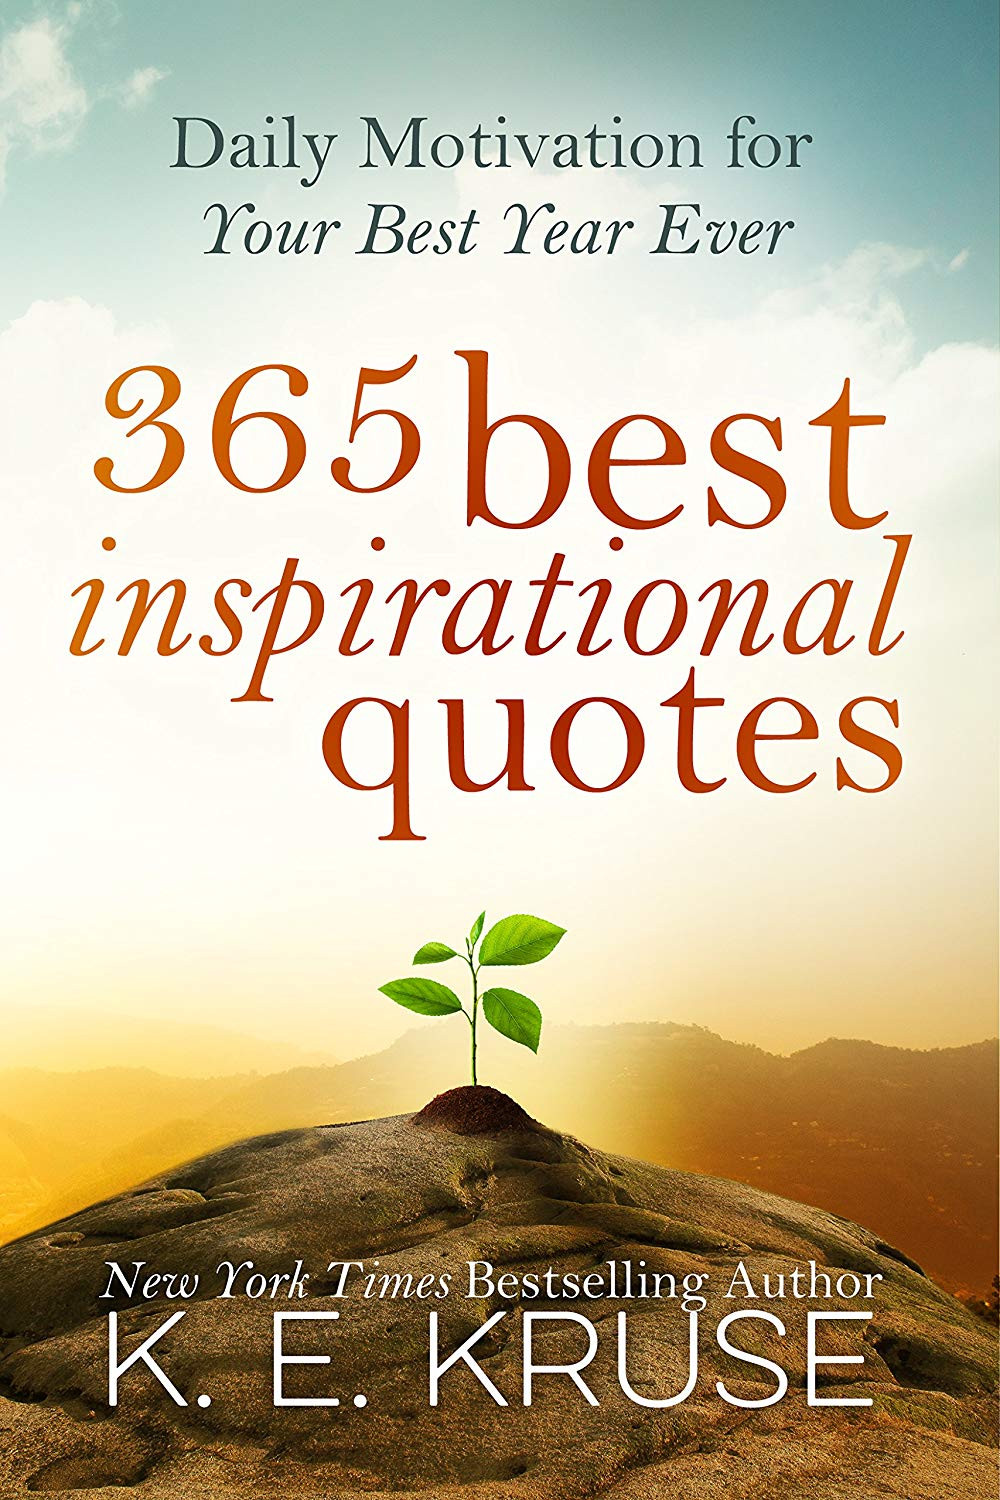 Best Motivational Quotes Ever
 AMAZON KINDLE BOOK PROMOTION 365 Best Inspirational